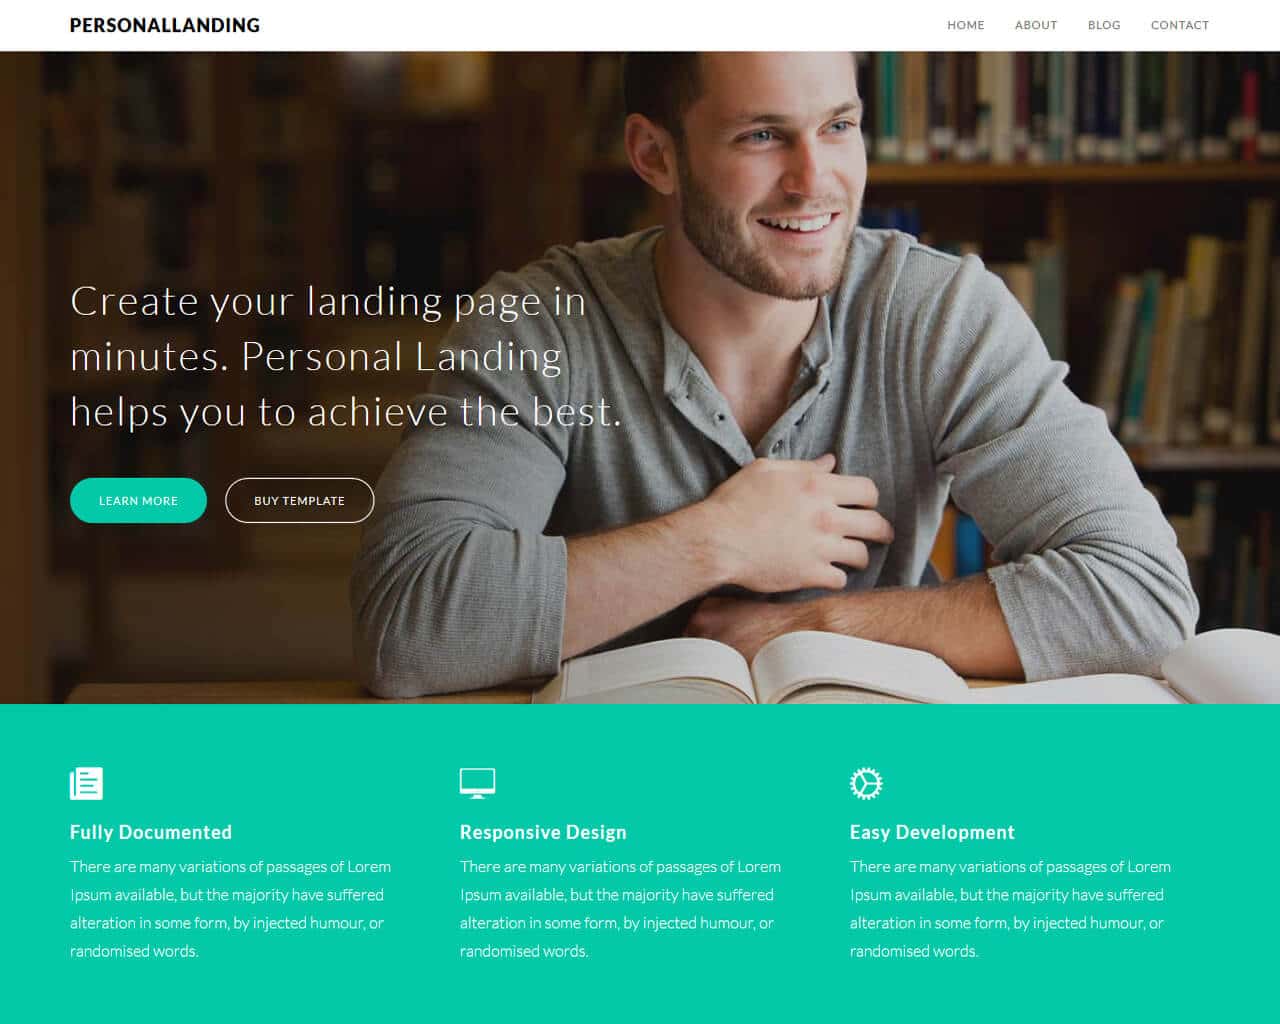 PersonalLanding – Bootstrap Landing Page Template